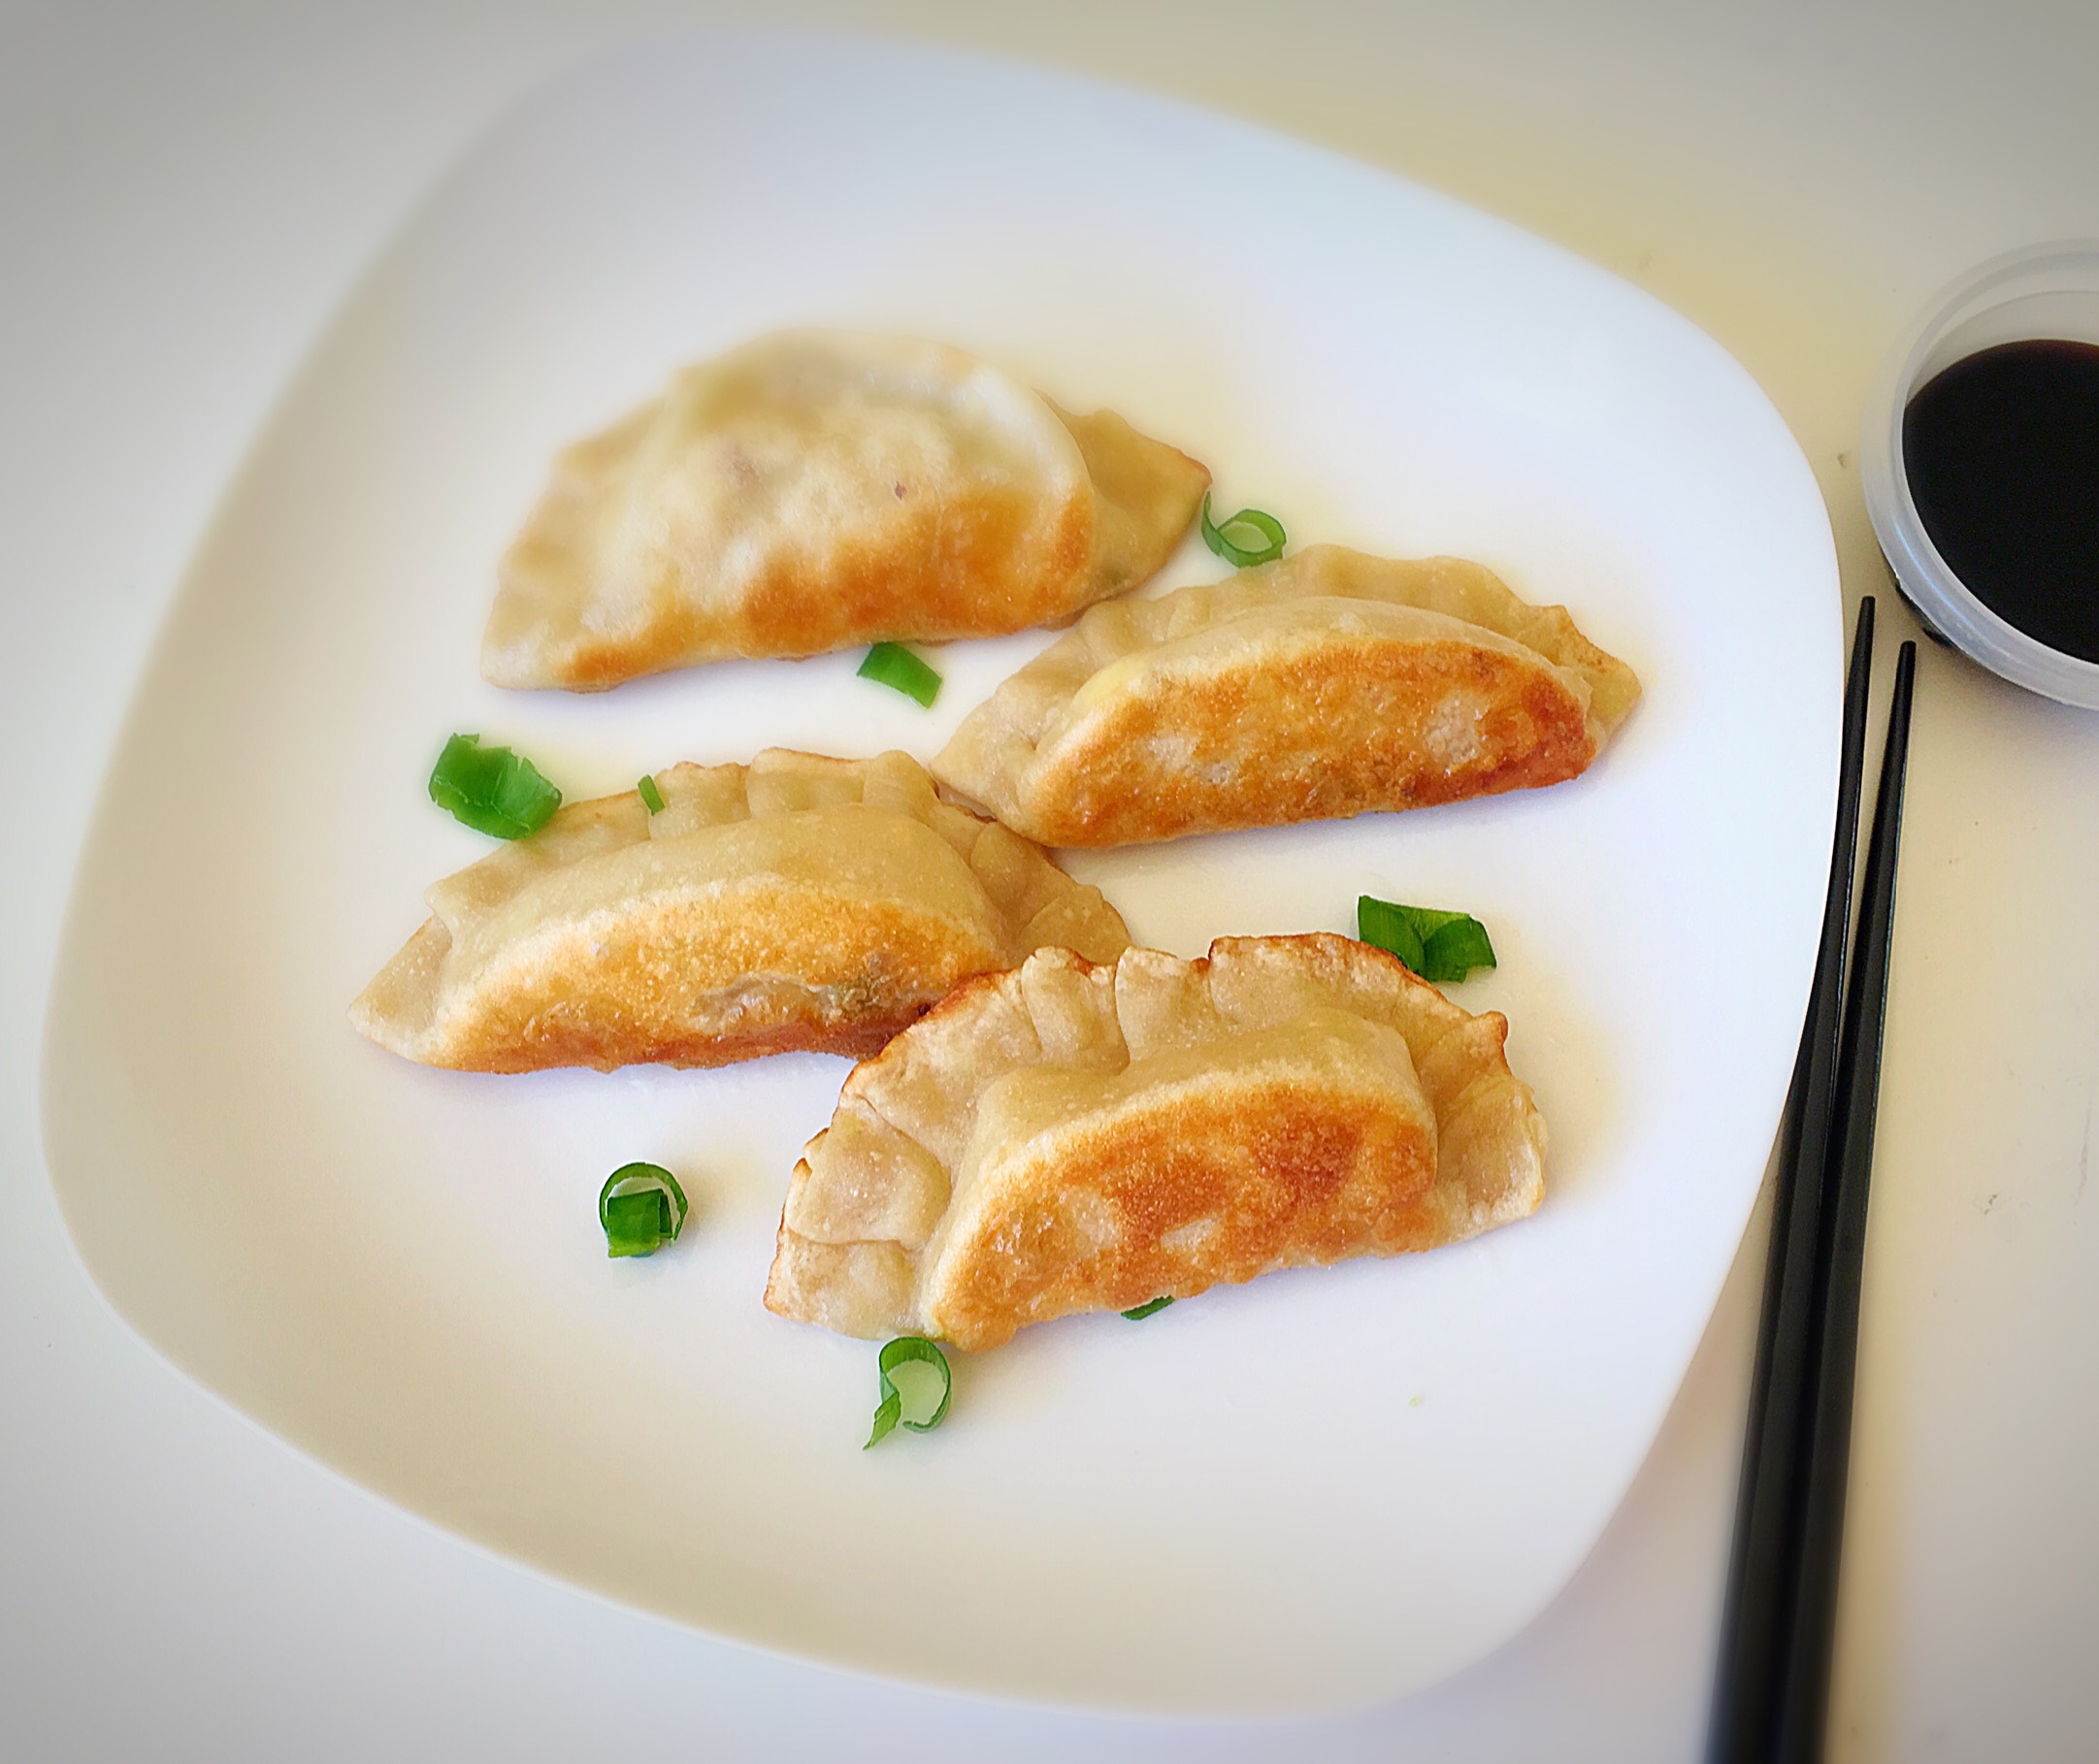 Dumpling,japanese,chinese,paneer,spring onion,gyazo,gyoza,japenese dumpling,gyoza dumpling,gyazo dumpling,falafel,soy sauce,sauce,india,desi,ginger,garlic,all purpose flour,cornstarch,oil,pan fried dumpling,steamed dumpling,japanese maincourse,china,japan,chopstick,oyster sauce,momos,stuffing,veg dumpling,easy dumpling,paneer stuffing,paneer dumpling,ready to eat,step by step pictures,onion,oil,water,pleating